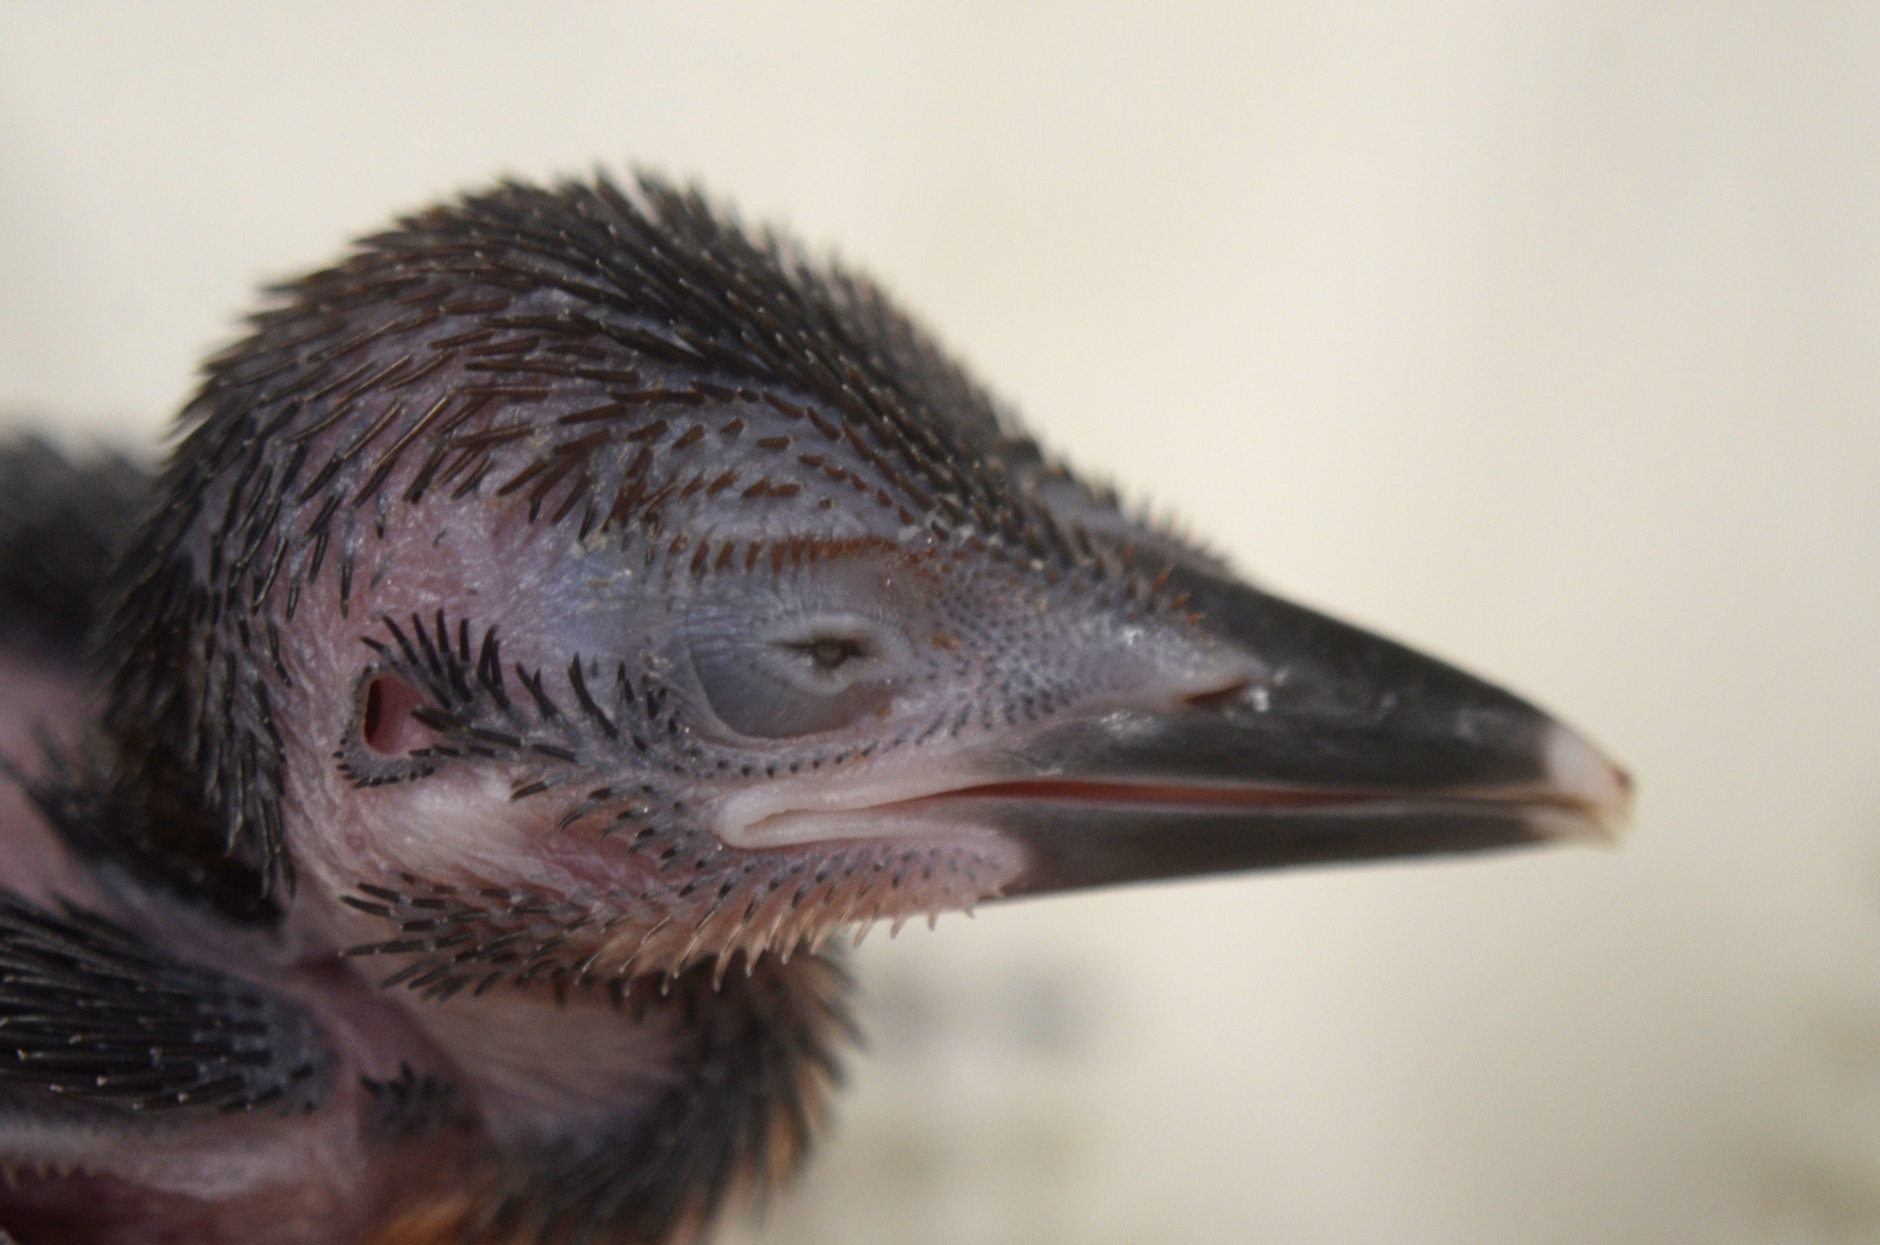 The 12-day-old Guam kingfisher chick at the Smithsonian Conservation Biology Institute. (Photo courtesy of Chris Crowe/Smithsonian Conservation Biology Institute)